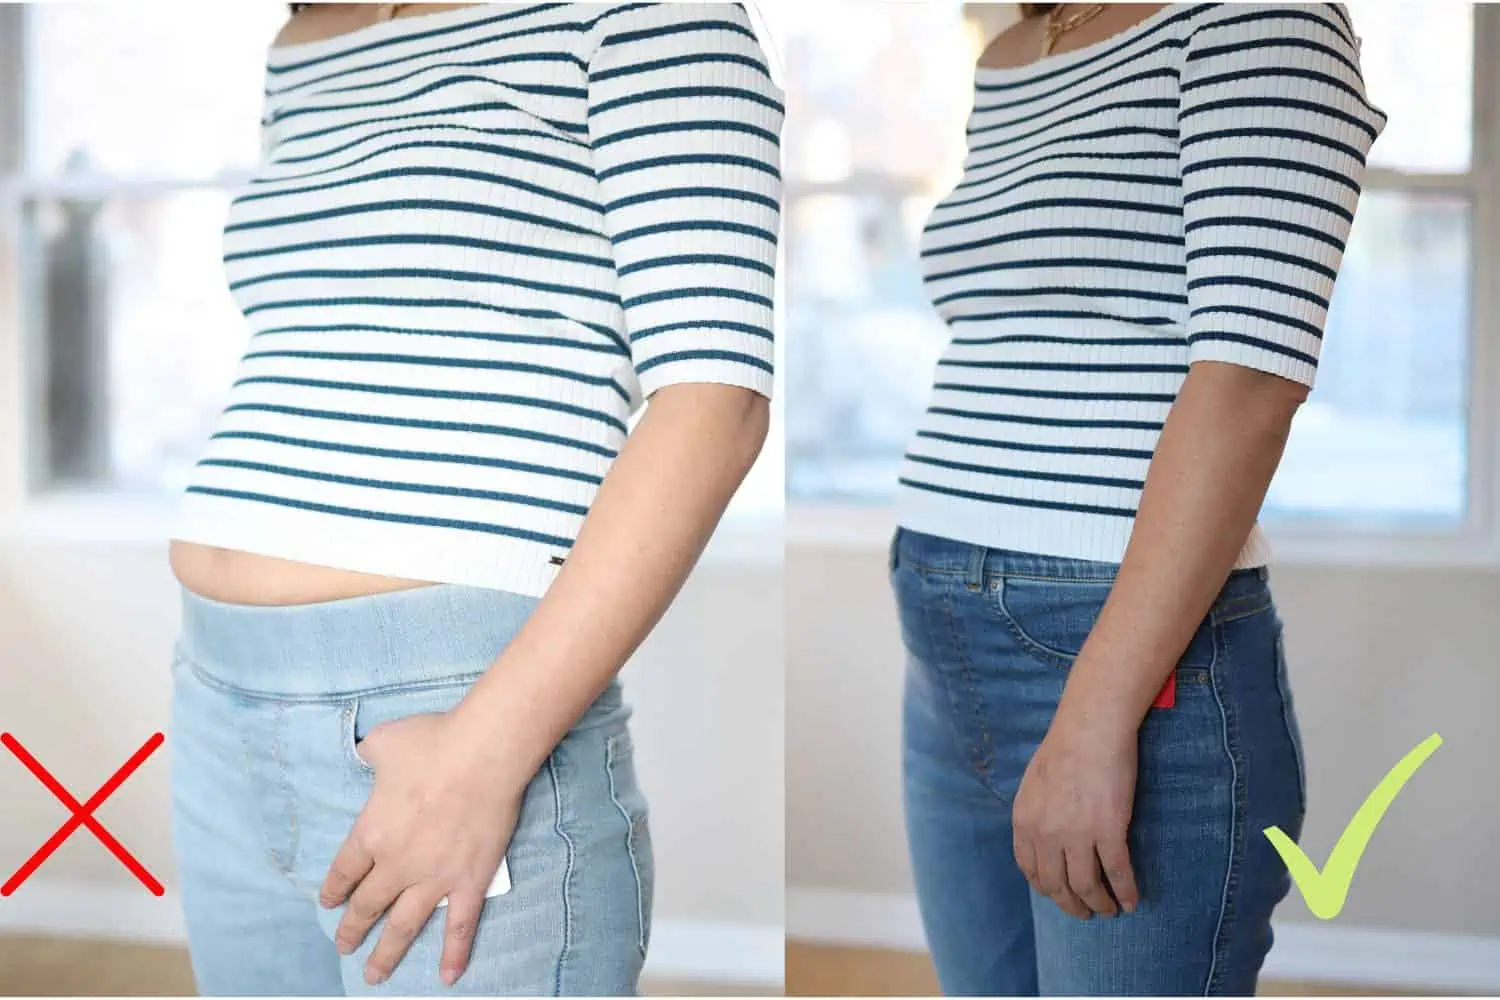 I have a noticeable belly. How can I wear over-sized tops without